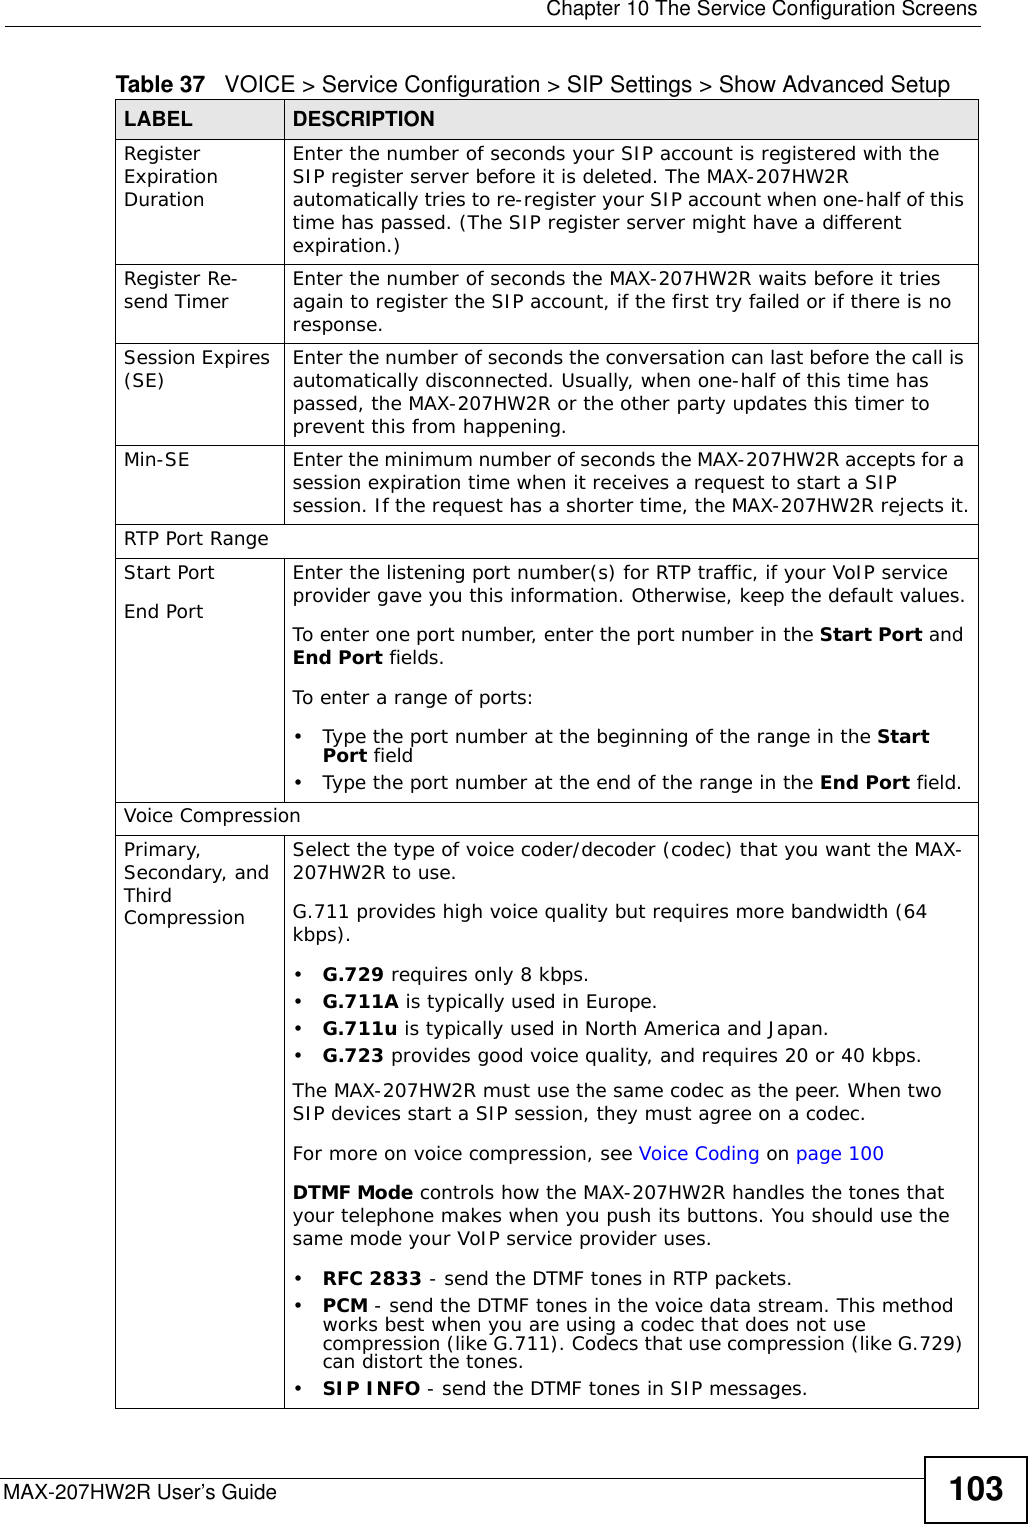  Chapter 10 The Service Configuration ScreensMAX-207HW2R User’s Guide 103Register Expiration DurationEnter the number of seconds your SIP account is registered with the SIP register server before it is deleted. The MAX-207HW2R automatically tries to re-register your SIP account when one-half of this time has passed. (The SIP register server might have a different expiration.)Register Re-send Timer Enter the number of seconds the MAX-207HW2R waits before it tries again to register the SIP account, if the first try failed or if there is no response.Session Expires (SE) Enter the number of seconds the conversation can last before the call is automatically disconnected. Usually, when one-half of this time has passed, the MAX-207HW2R or the other party updates this timer to prevent this from happening.Min-SE Enter the minimum number of seconds the MAX-207HW2R accepts for a session expiration time when it receives a request to start a SIP session. If the request has a shorter time, the MAX-207HW2R rejects it.RTP Port RangeStart PortEnd PortEnter the listening port number(s) for RTP traffic, if your VoIP service provider gave you this information. Otherwise, keep the default values.To enter one port number, enter the port number in the Start Port and End Port fields.To enter a range of ports:• Type the port number at the beginning of the range in the Start Port field• Type the port number at the end of the range in the End Port field.Voice CompressionPrimary, Secondary, and Third CompressionSelect the type of voice coder/decoder (codec) that you want the MAX-207HW2R to use. G.711 provides high voice quality but requires more bandwidth (64 kbps).•G.729 requires only 8 kbps.•G.711A is typically used in Europe.•G.711u is typically used in North America and Japan.•G.723 provides good voice quality, and requires 20 or 40 kbps.The MAX-207HW2R must use the same codec as the peer. When two SIP devices start a SIP session, they must agree on a codec.For more on voice compression, see Voice Coding on page 100DTMF Mode controls how the MAX-207HW2R handles the tones that your telephone makes when you push its buttons. You should use the same mode your VoIP service provider uses.•RFC 2833 - send the DTMF tones in RTP packets.•PCM - send the DTMF tones in the voice data stream. This method works best when you are using a codec that does not use compression (like G.711). Codecs that use compression (like G.729) can distort the tones.•SIP INFO - send the DTMF tones in SIP messages.Table 37   VOICE &gt; Service Configuration &gt; SIP Settings &gt; Show Advanced Setup LABEL DESCRIPTION